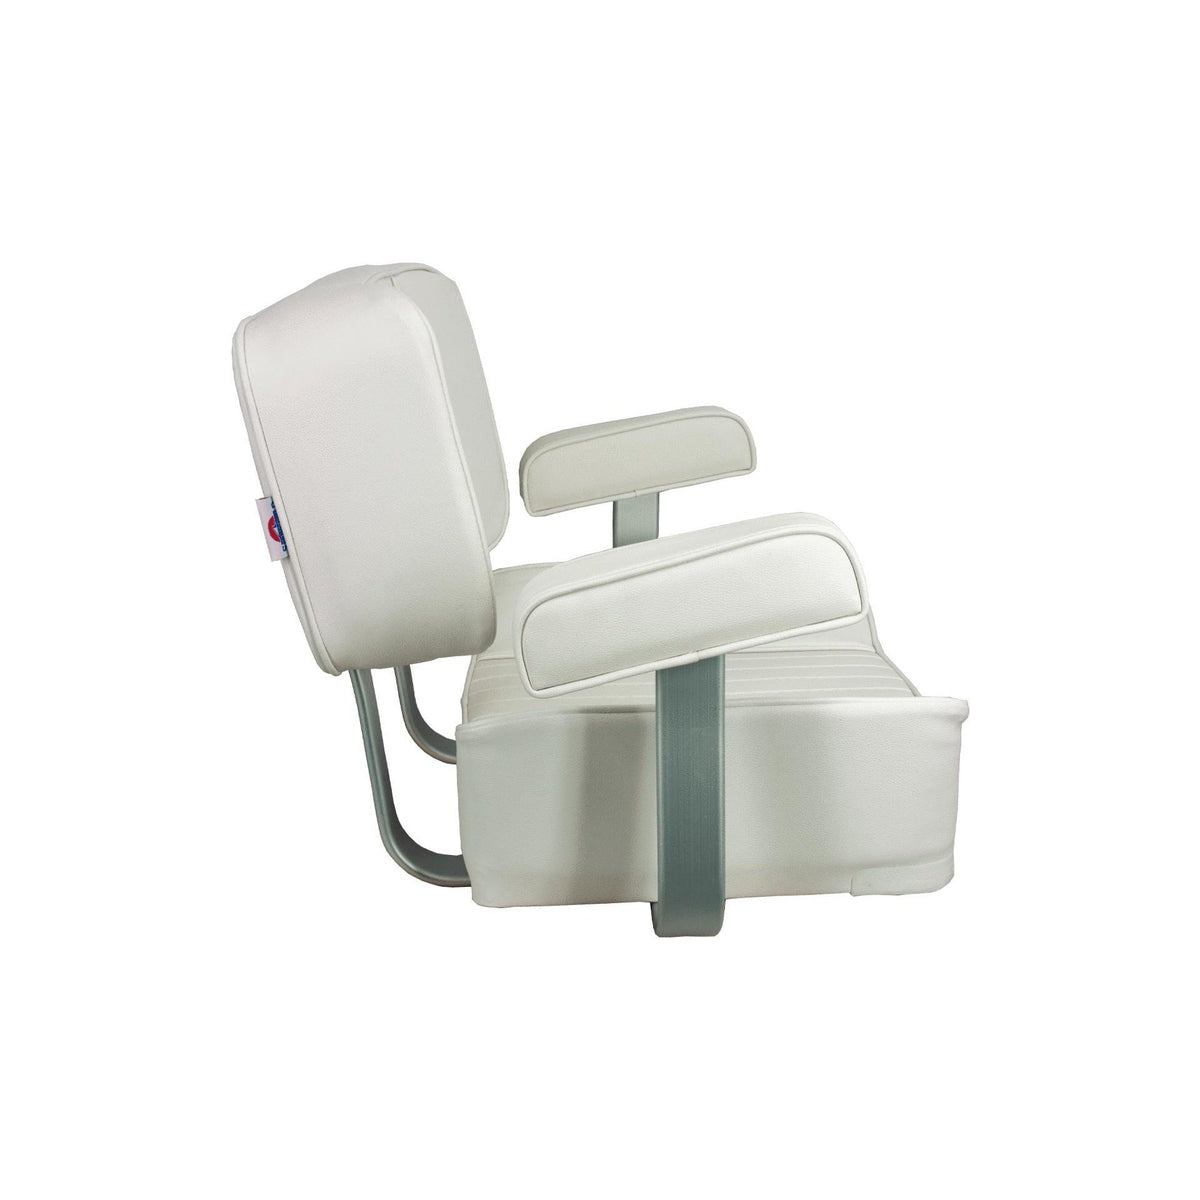 Springfield Oversized - Not Qualified for Free Shipping Springfield Deluxe Captain's Chair White #1040002